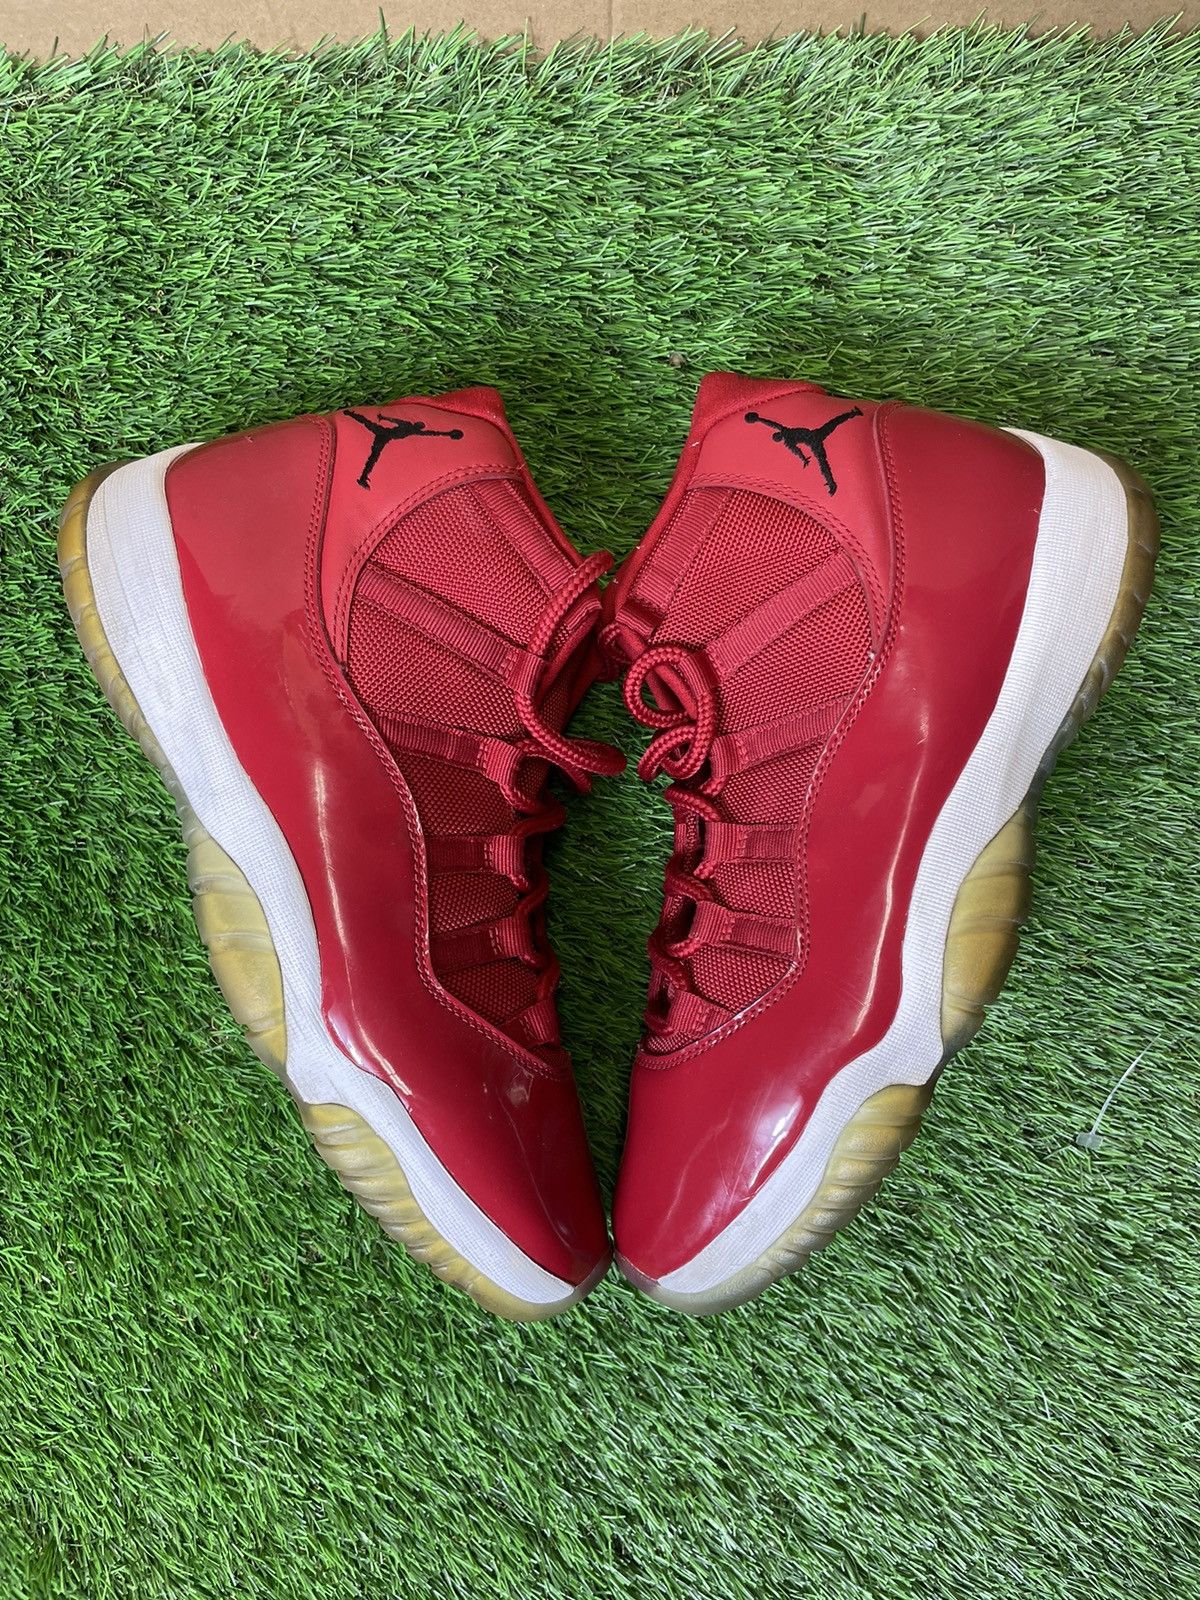 Pre-owned Jordan Brand 11 Win Like 96 Size 10.5 Used Shoes In Red